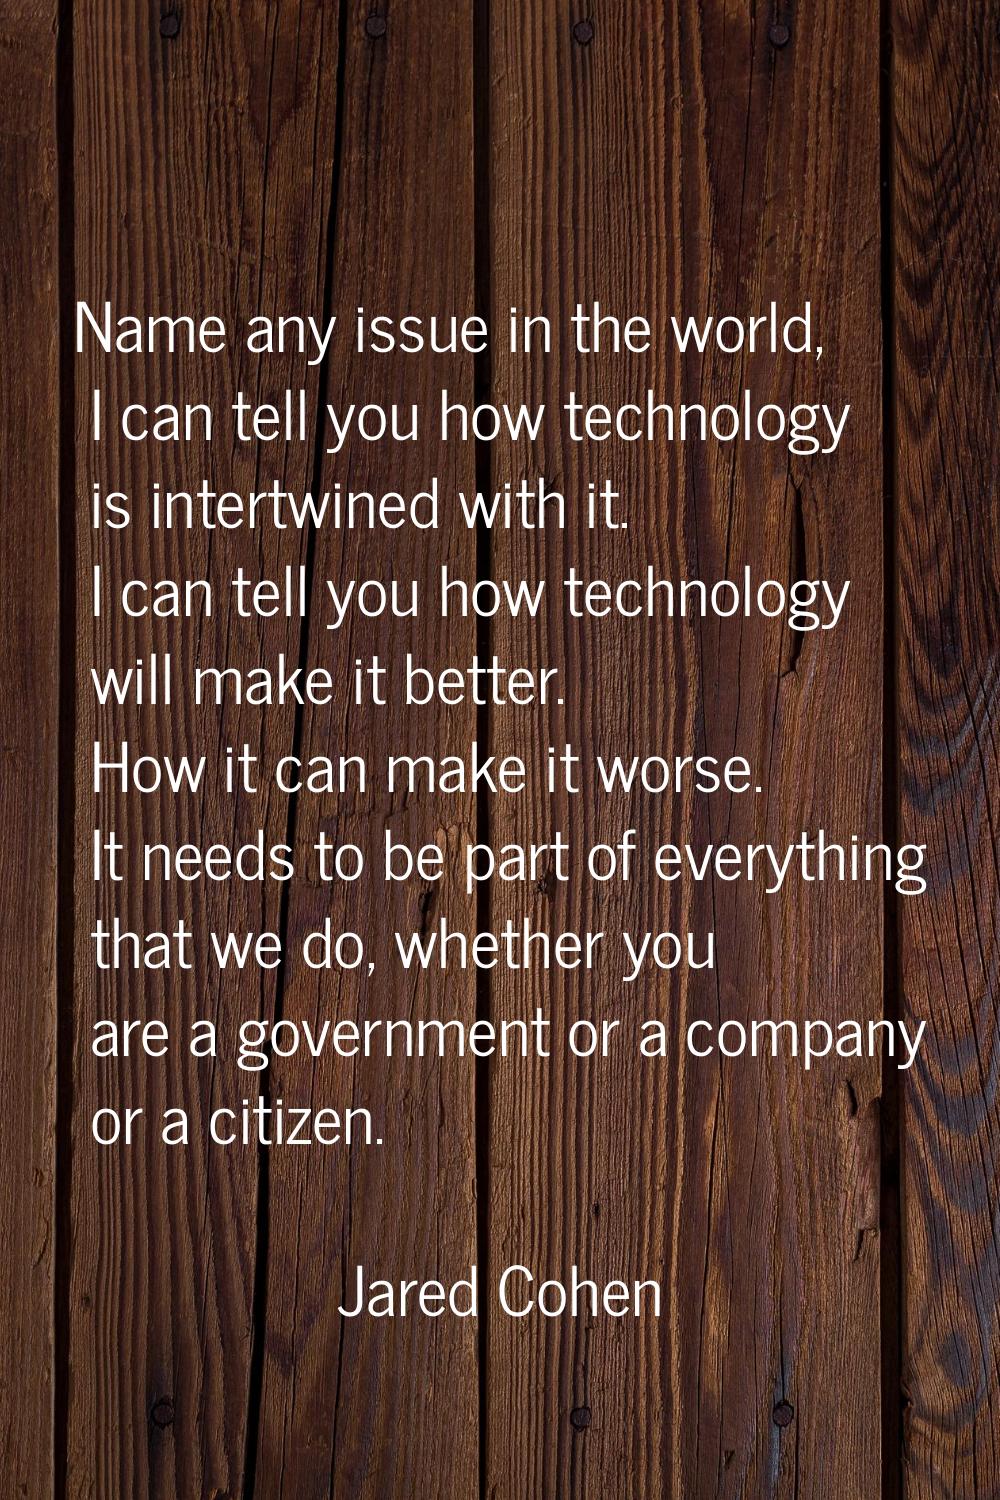 Name any issue in the world, I can tell you how technology is intertwined with it. I can tell you h